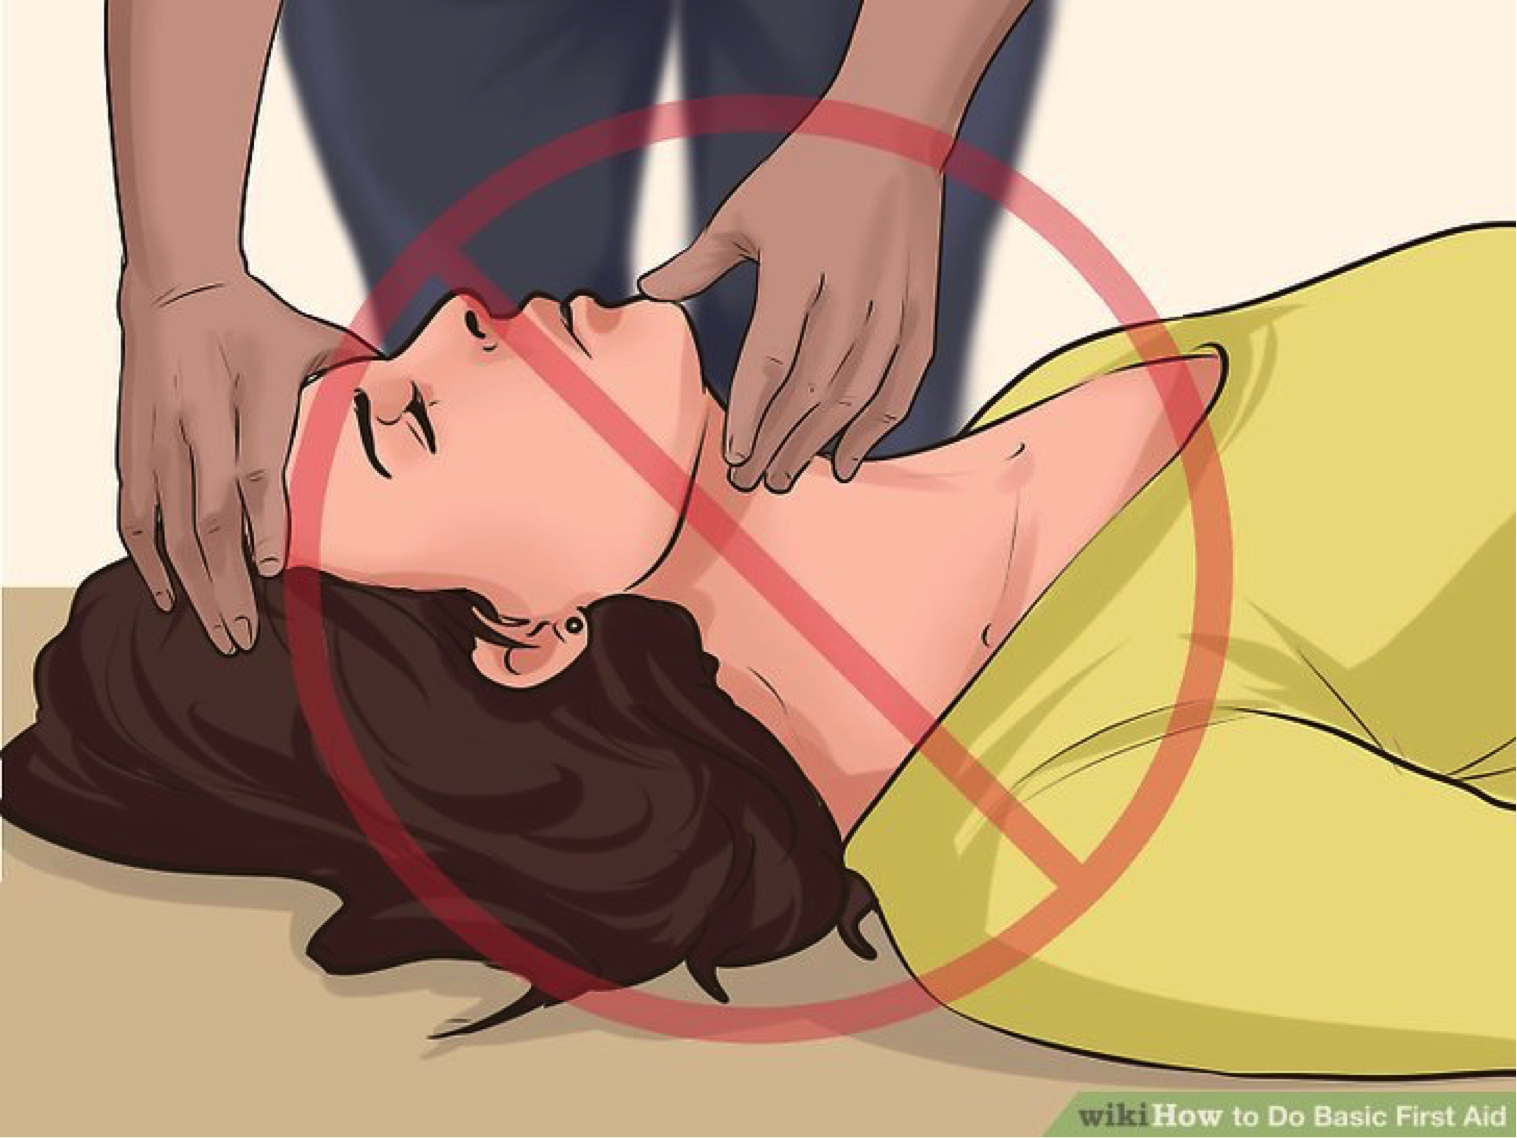 http://www.medsquirrel.co.za/Content/cmsimages/FirstAid/AAFirstAidImages/Basic%20First%20Aid/Basic-First-Aid-method3%288%29.png